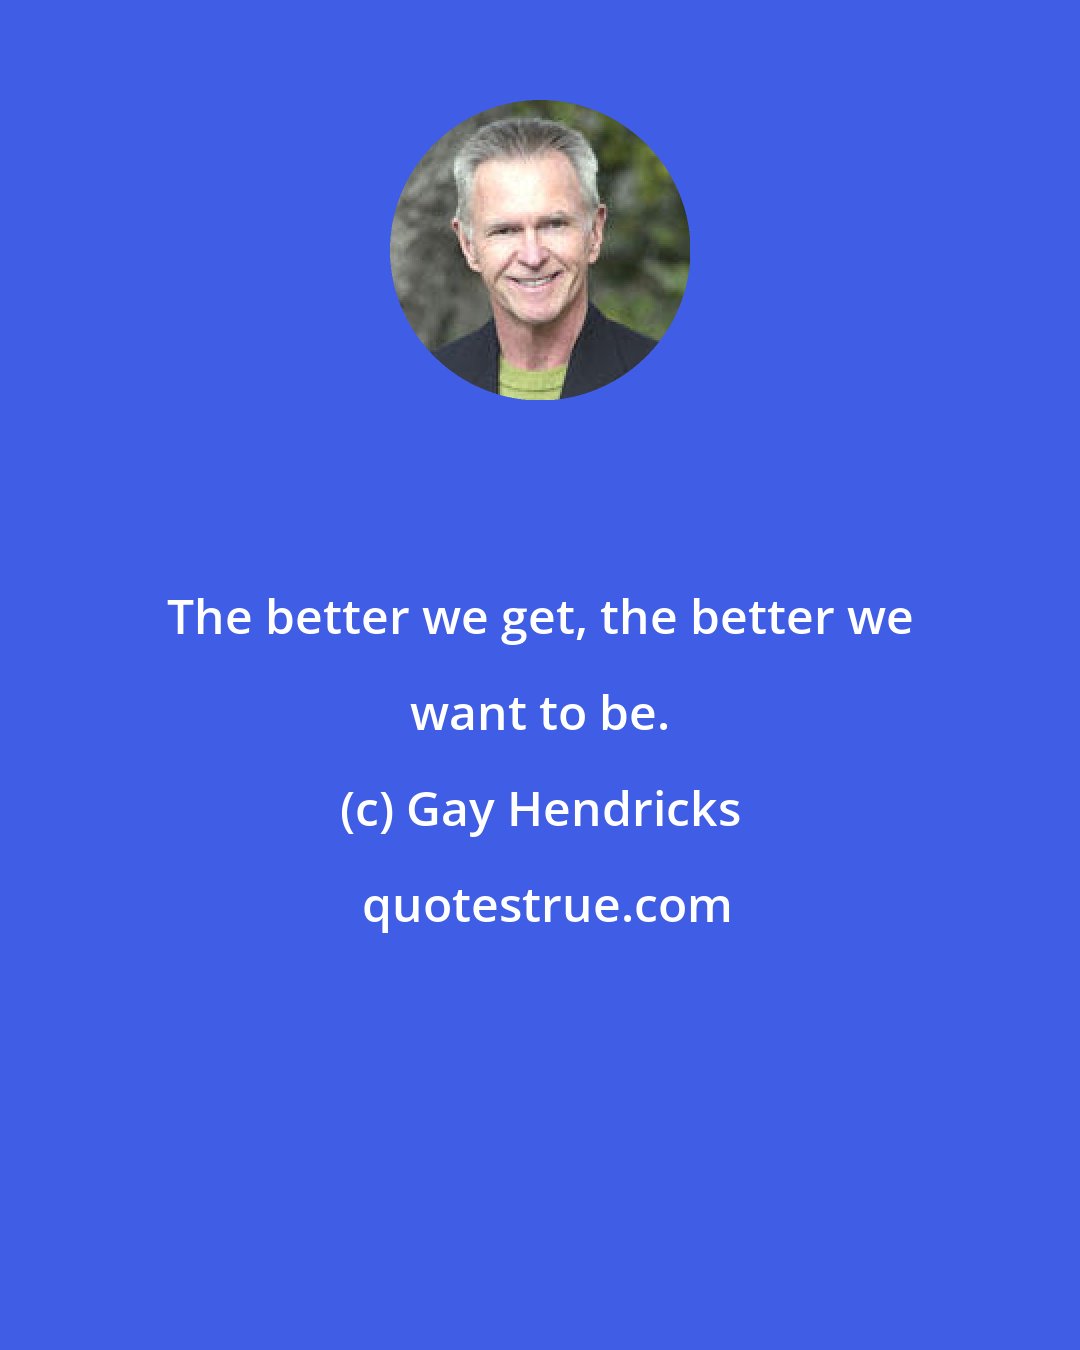 Gay Hendricks: The better we get, the better we want to be.